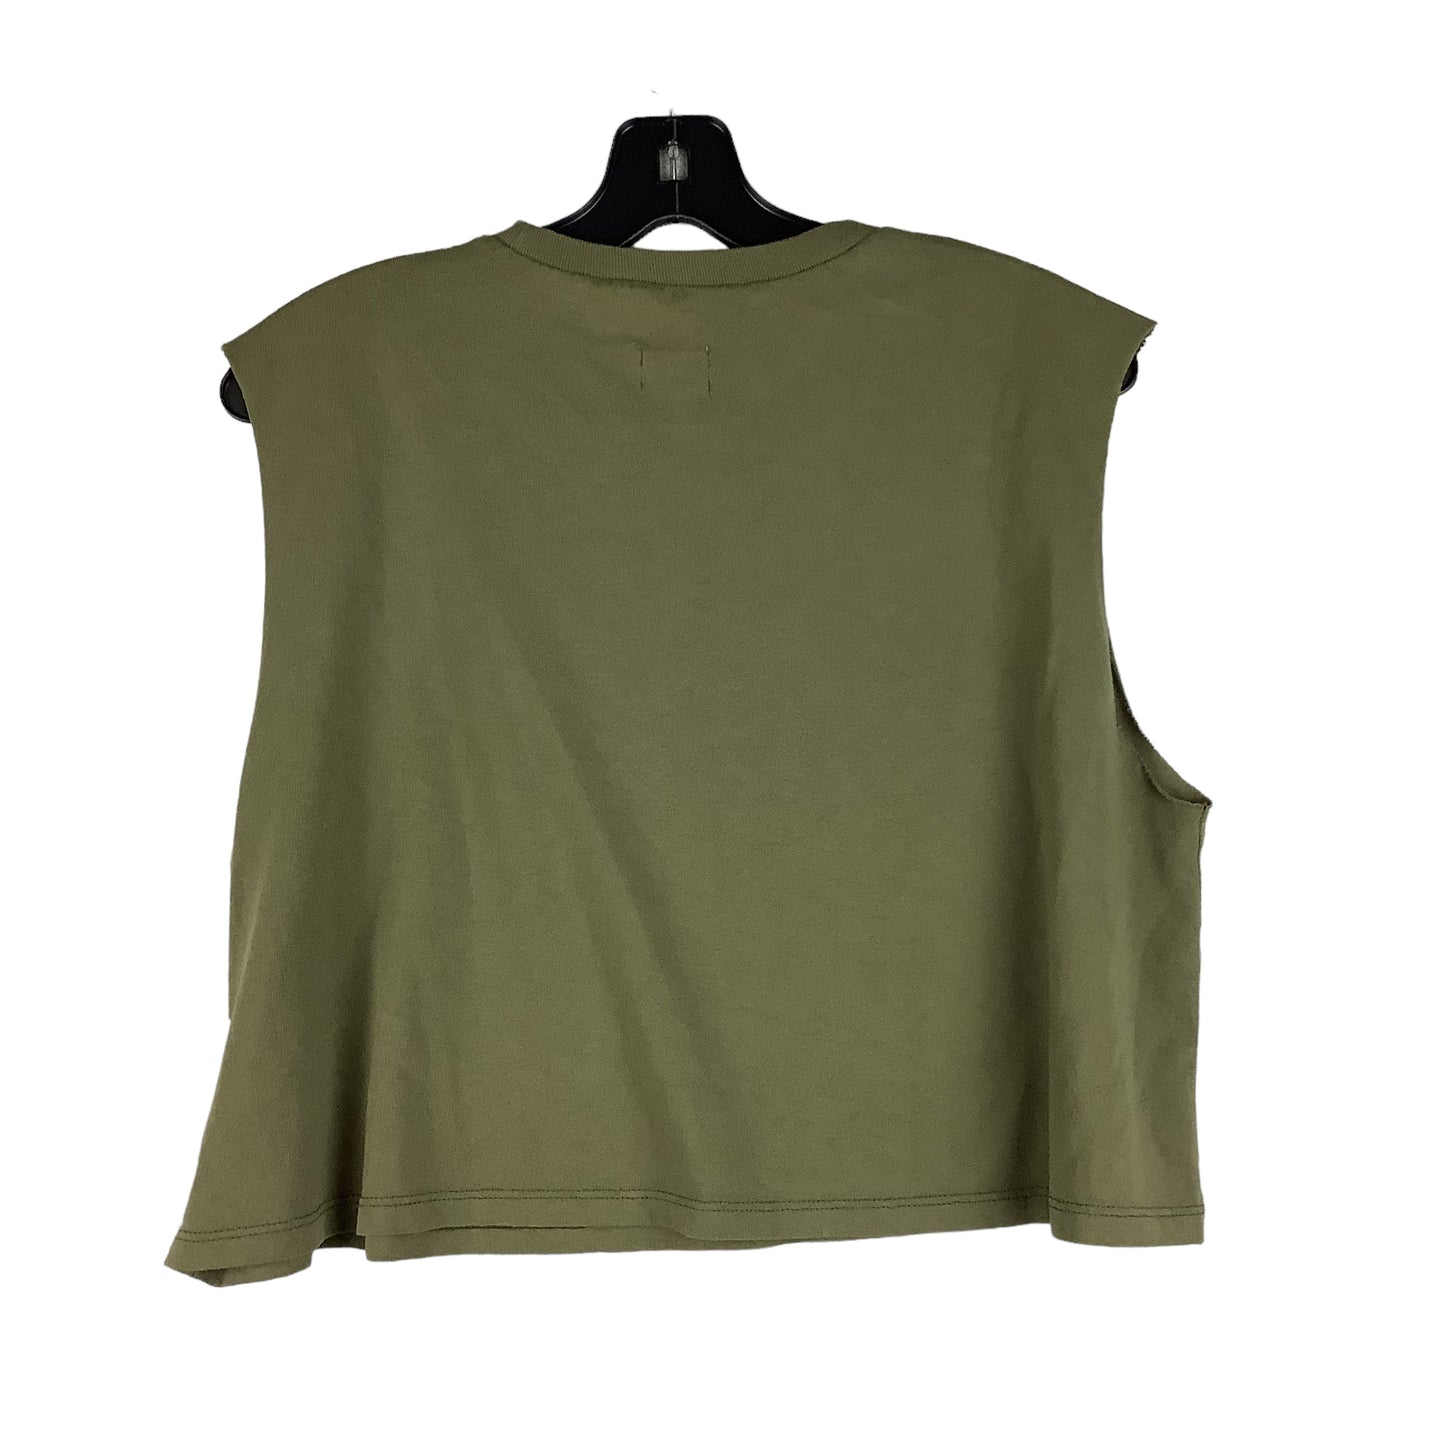 Green Top Short Sleeve Bdg, Size S